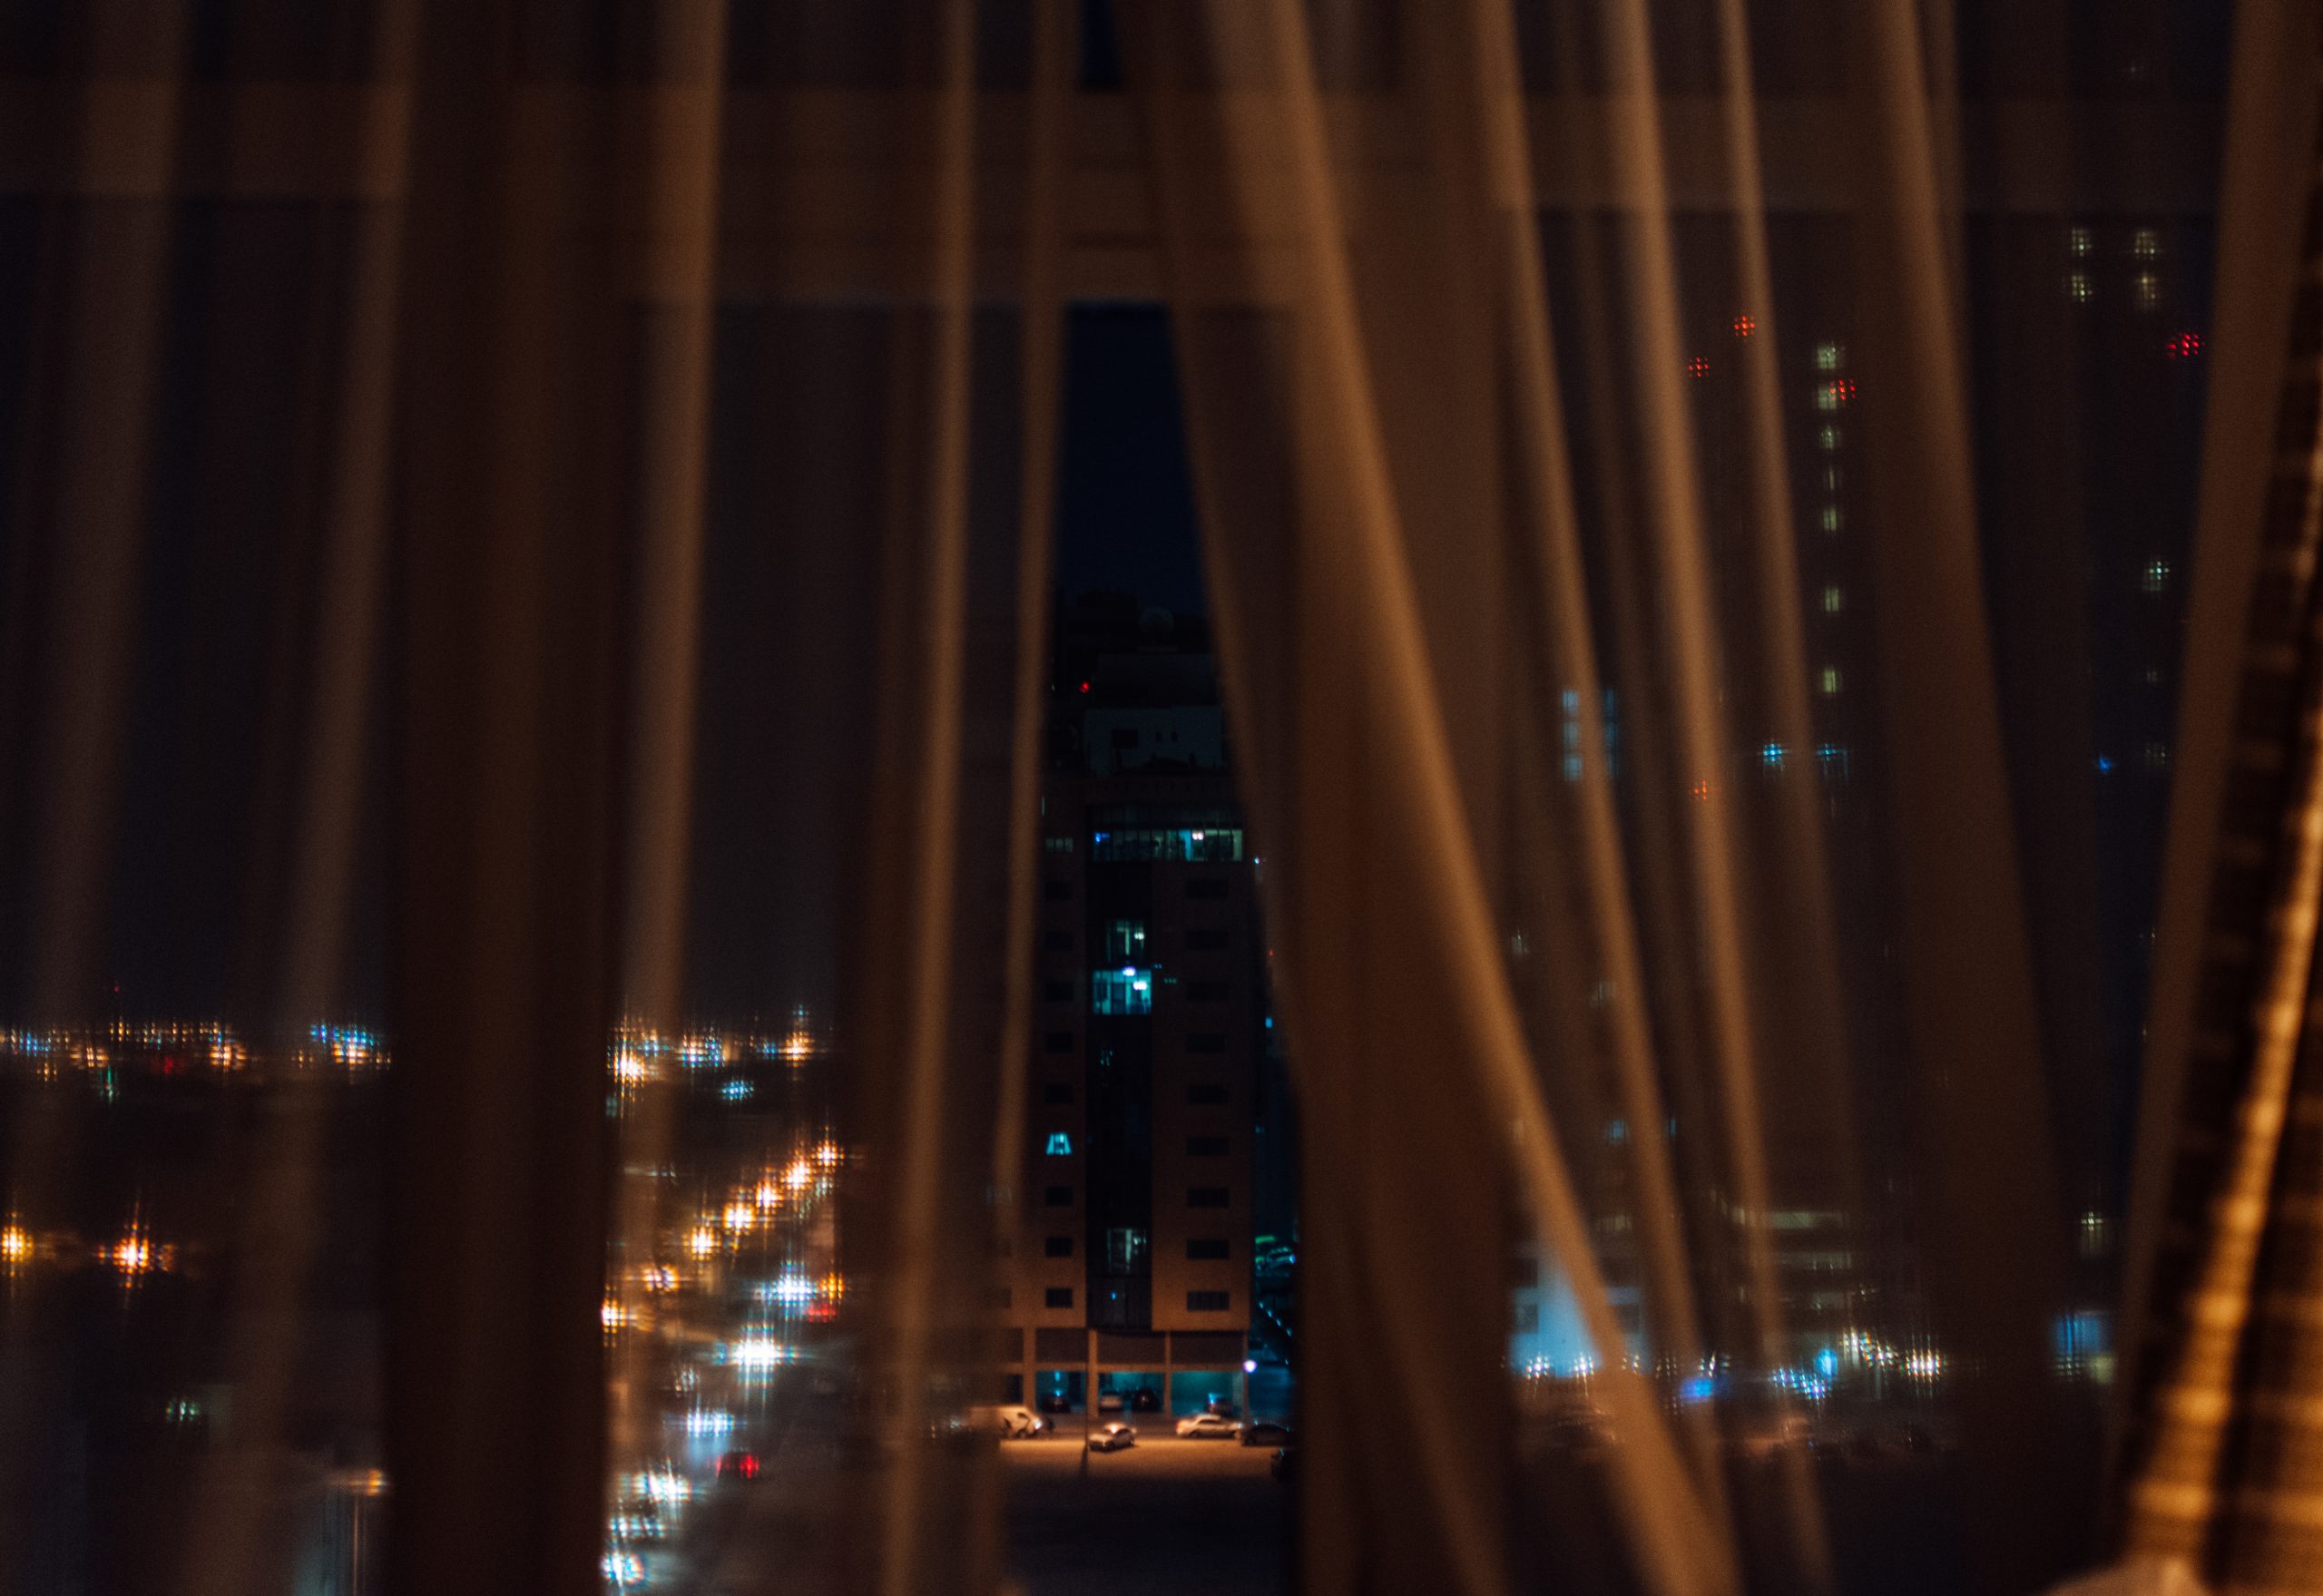 Photograph looking through a window encased by curtains, into a night urban scene.